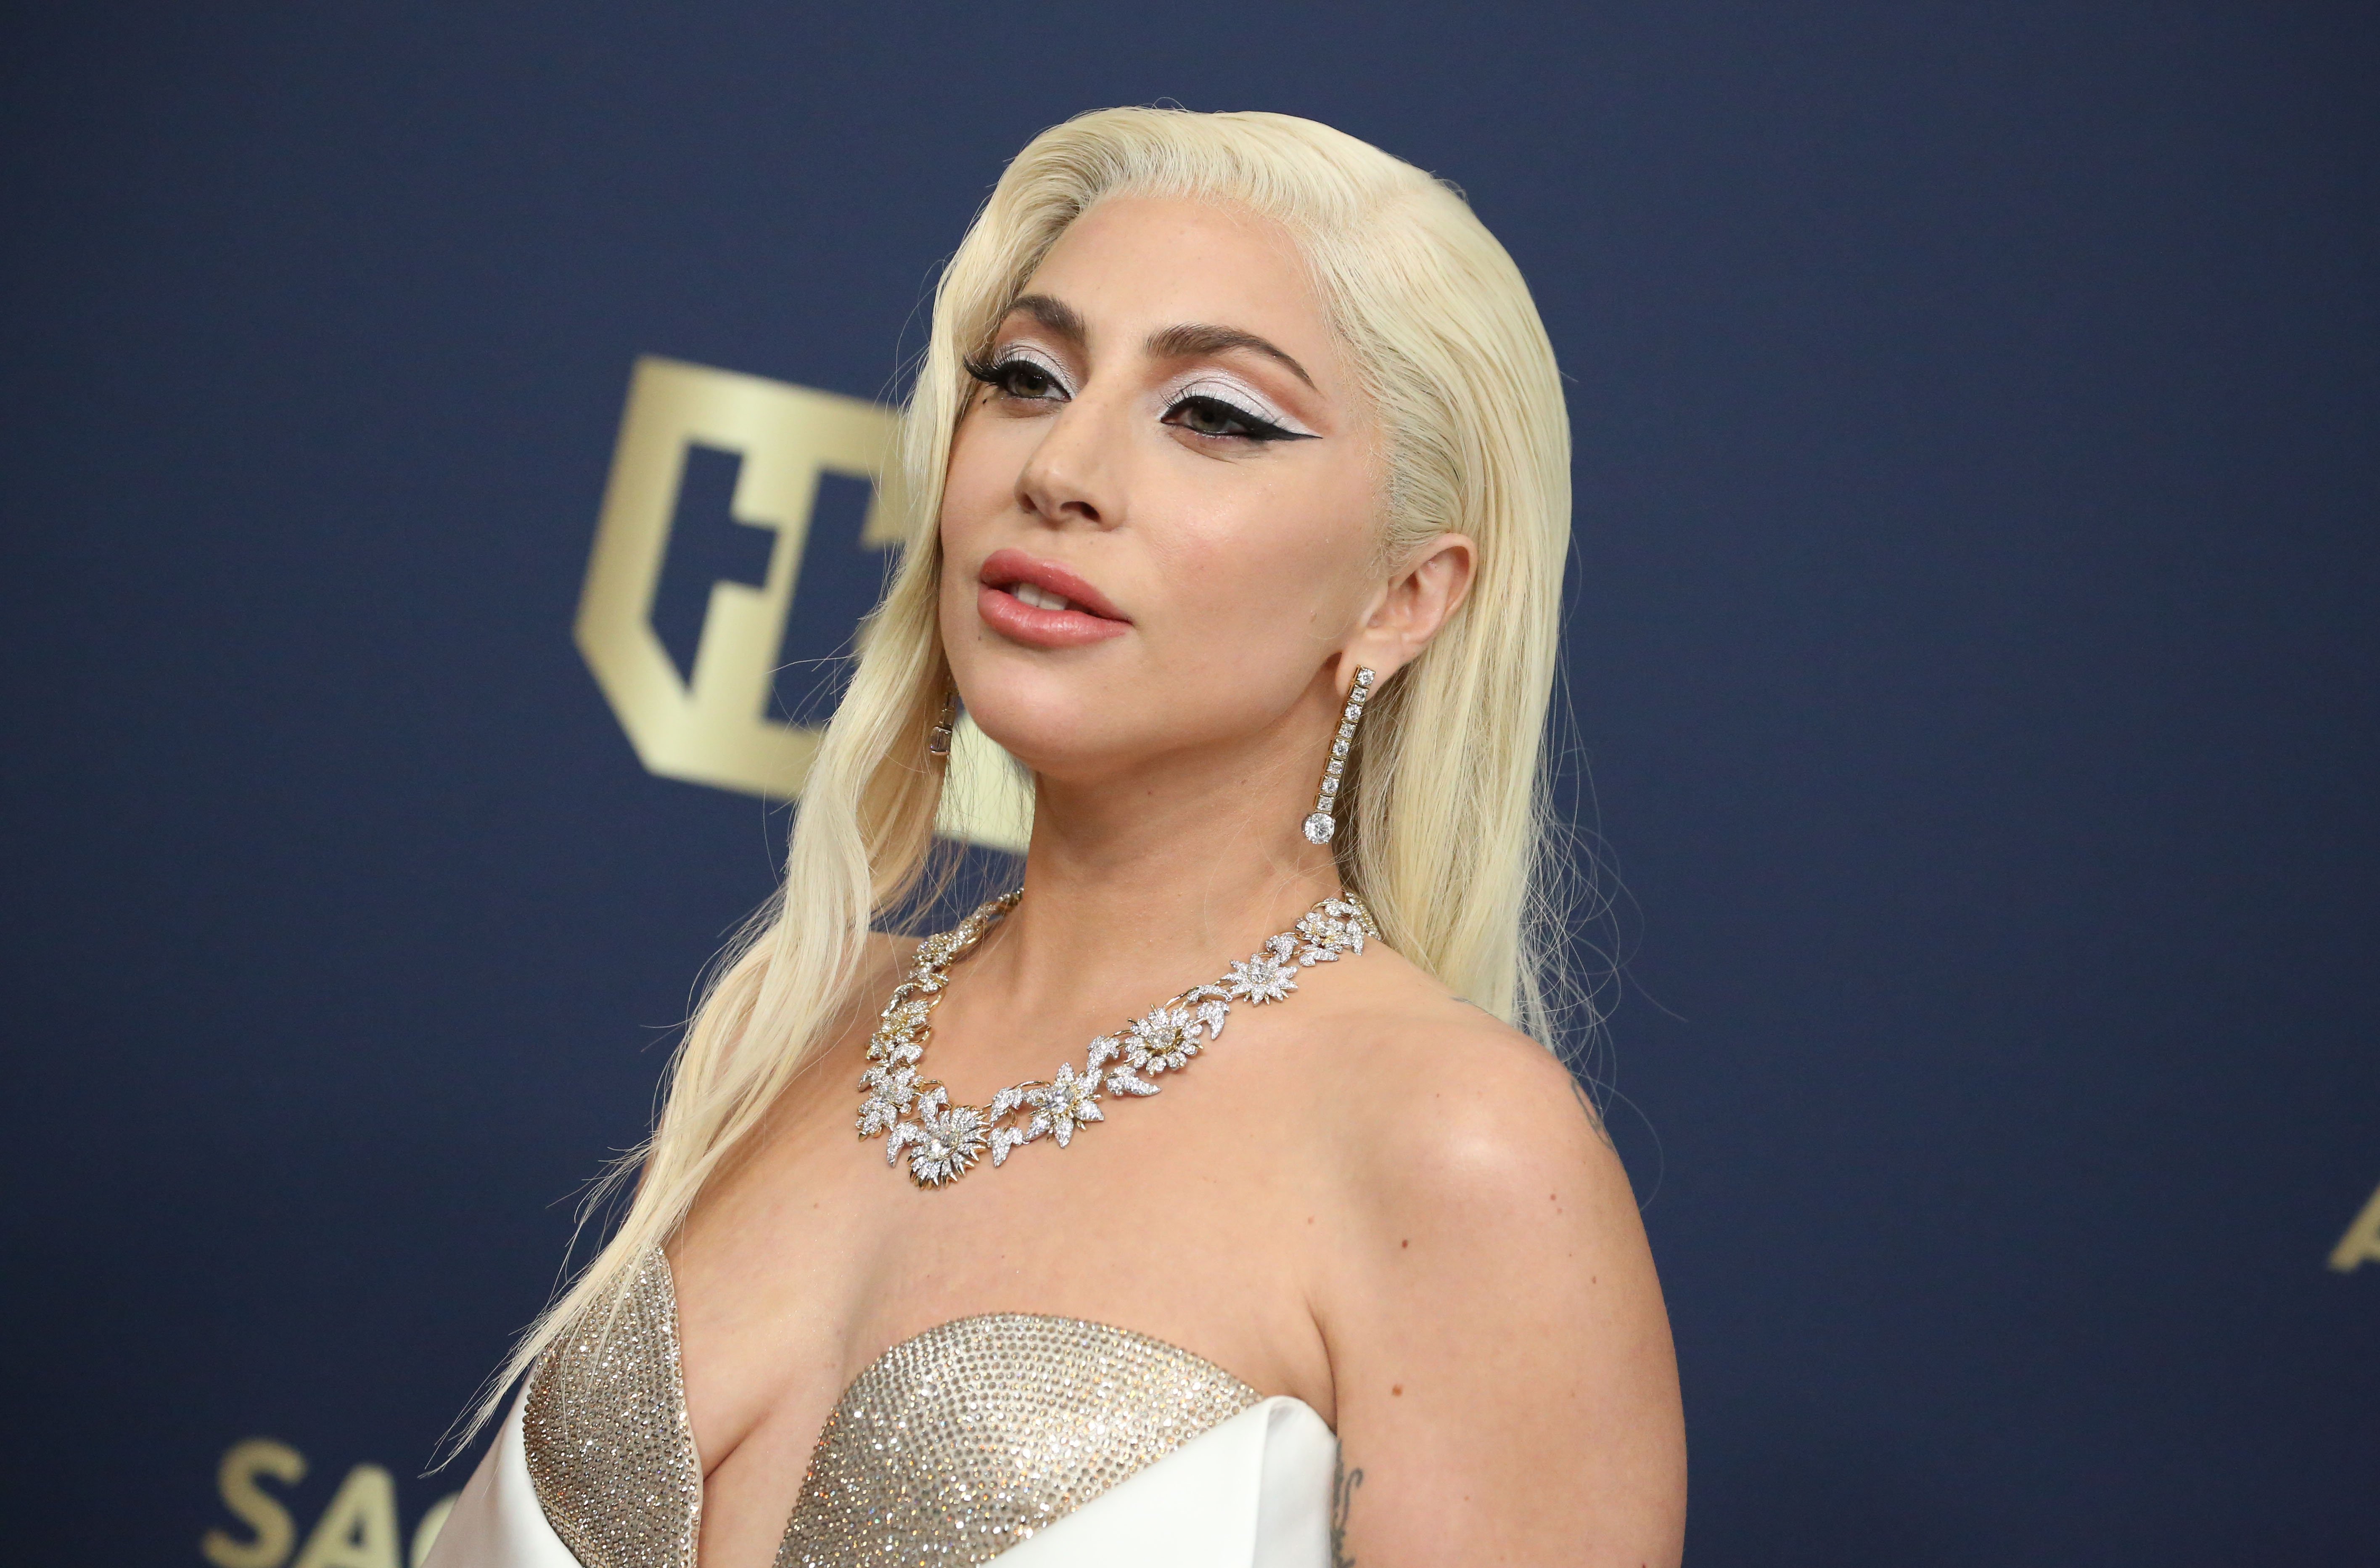 Did Lady Gaga Get Plastic Surgery? What She's Said About It